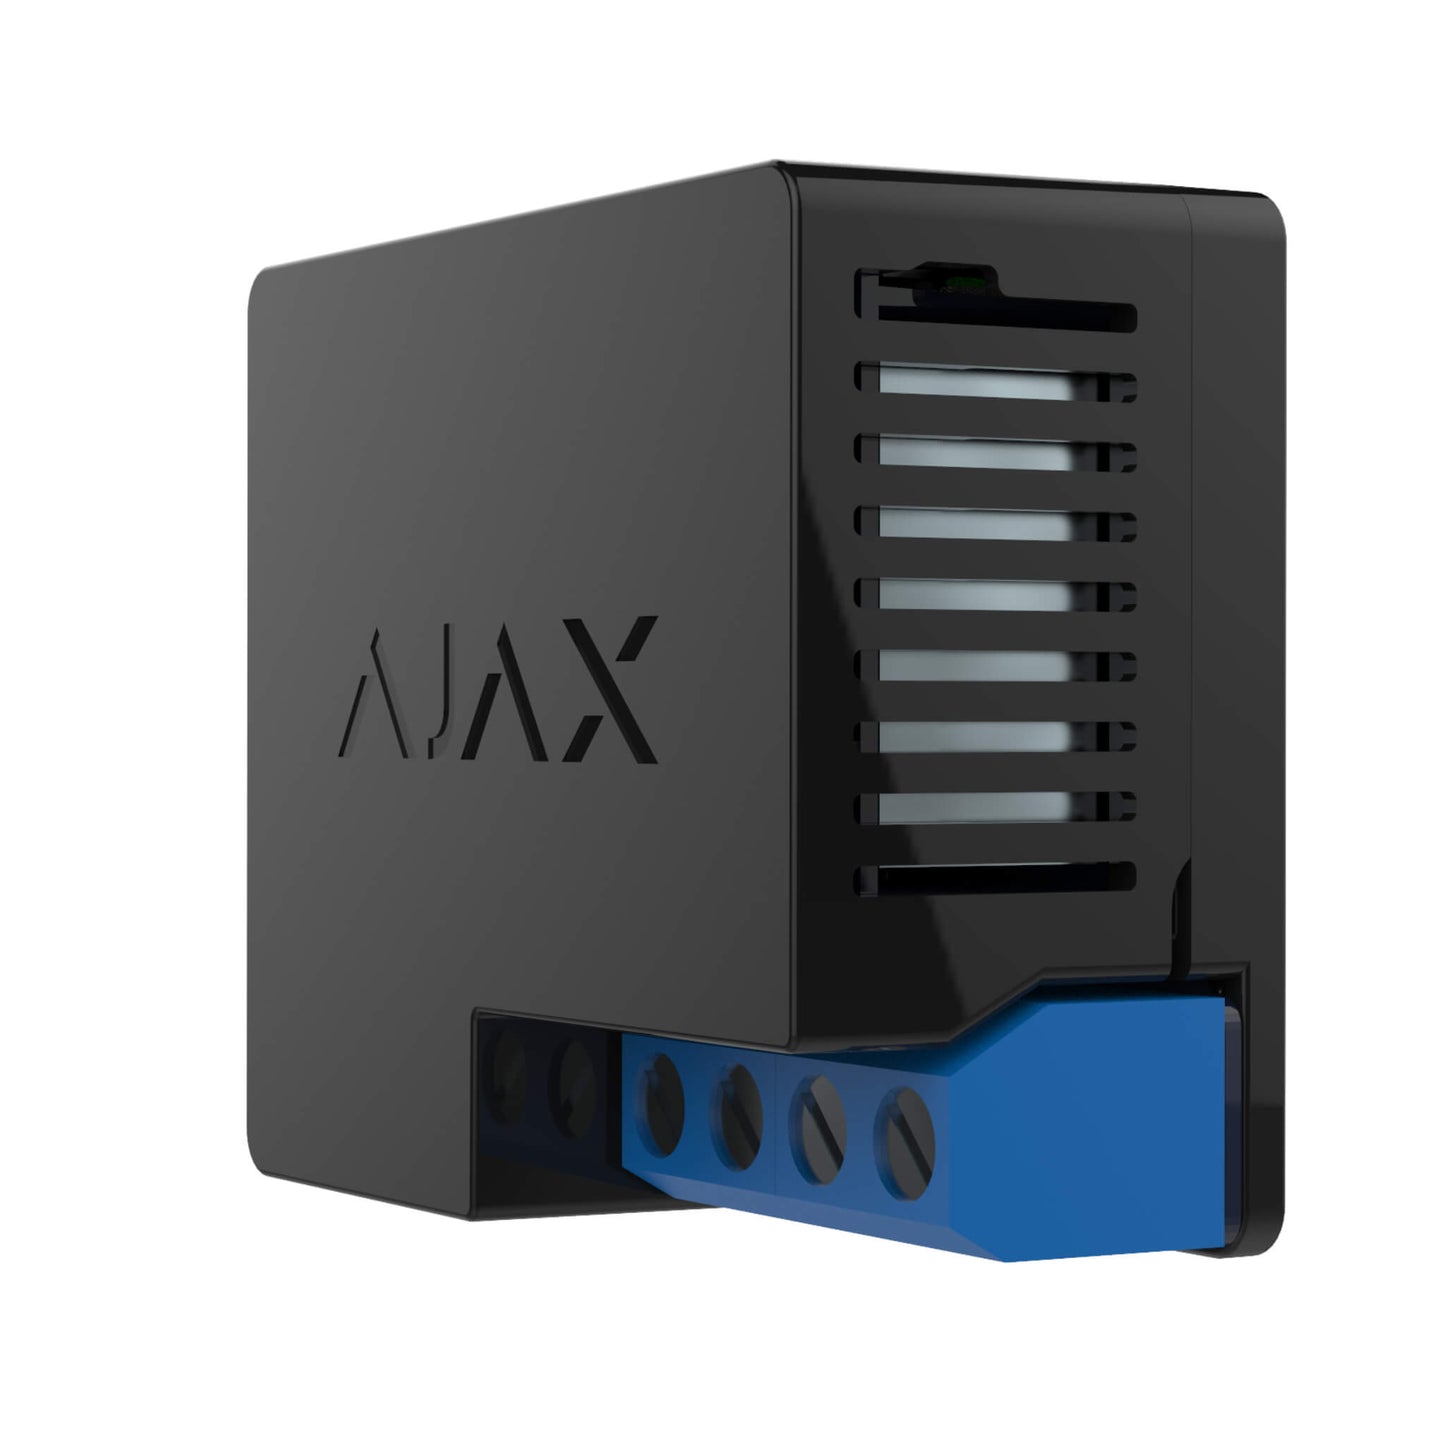 Black Ajax WallSwitch a device used to control 230volt appiances in youre home or business, connection is normally open or normally closed. The device is 39 × 33 × 18 mm in size , 30grams in weight. is Wall mountable using DIN holder. Turned left view of device for indoor installation only.